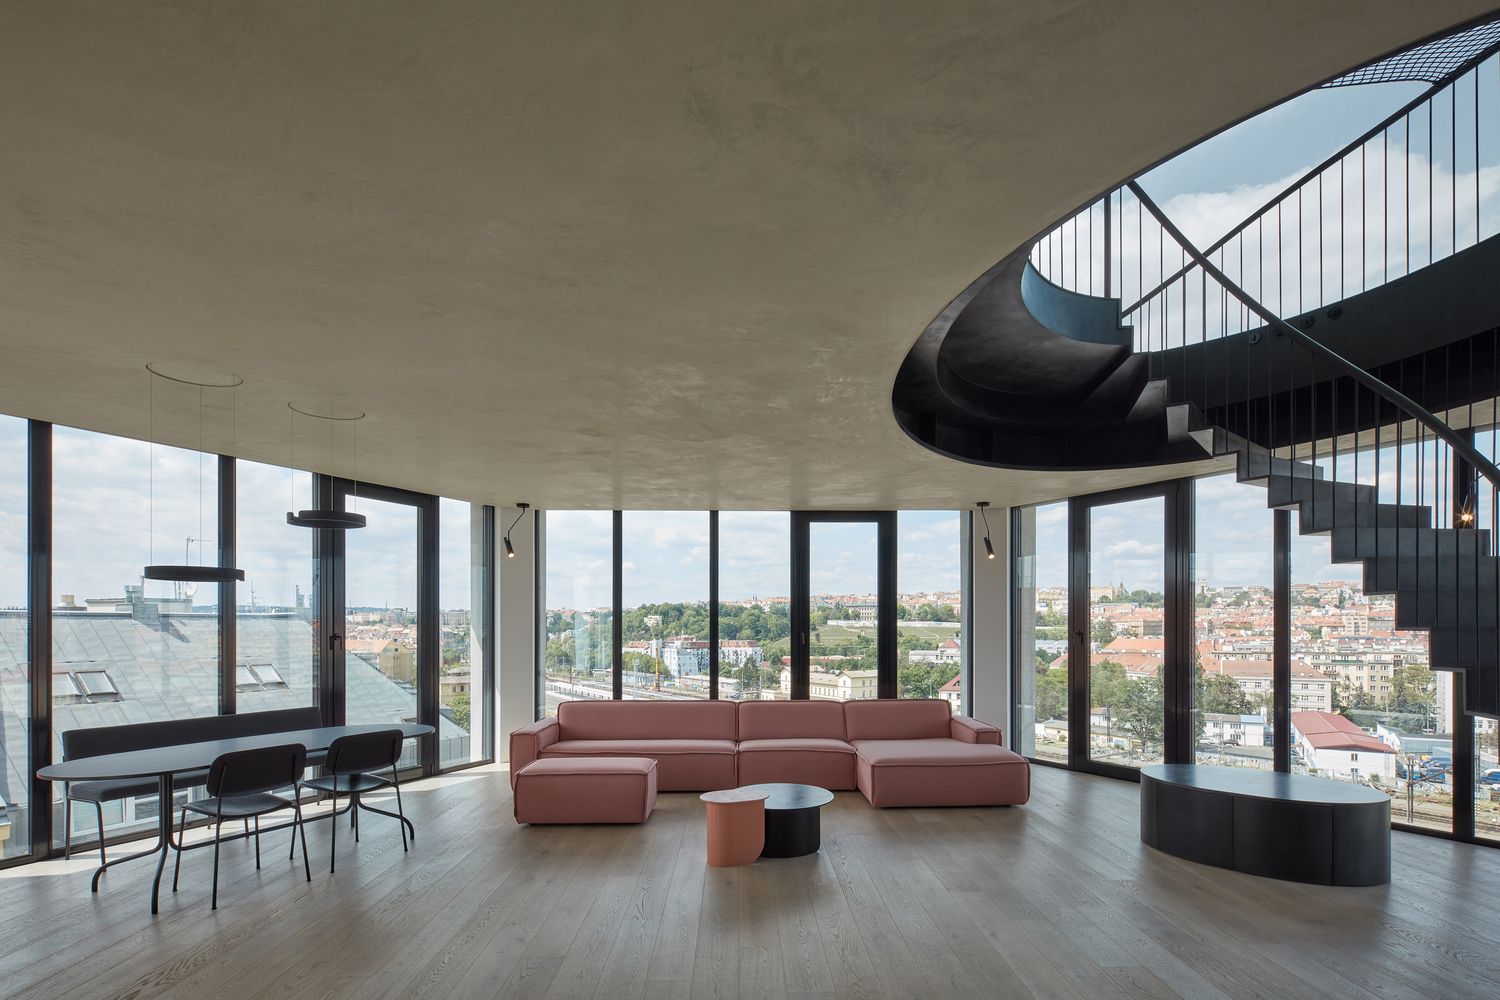 You can see all Prague from this special penthouse apartment